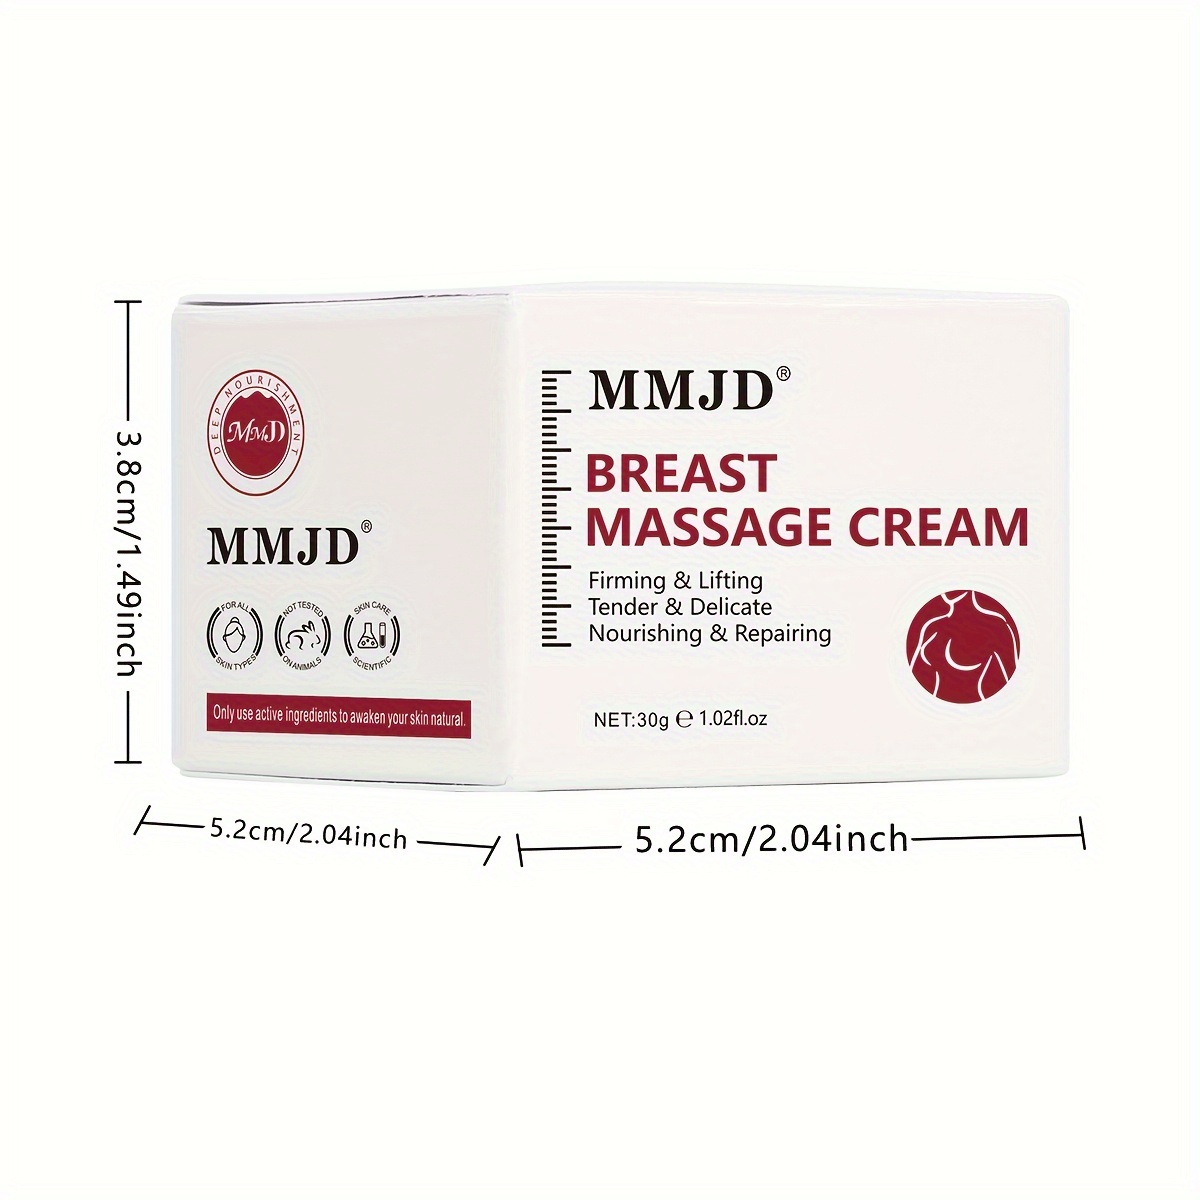 Breast Massage Cream To Moisturize And Firm The Body Care